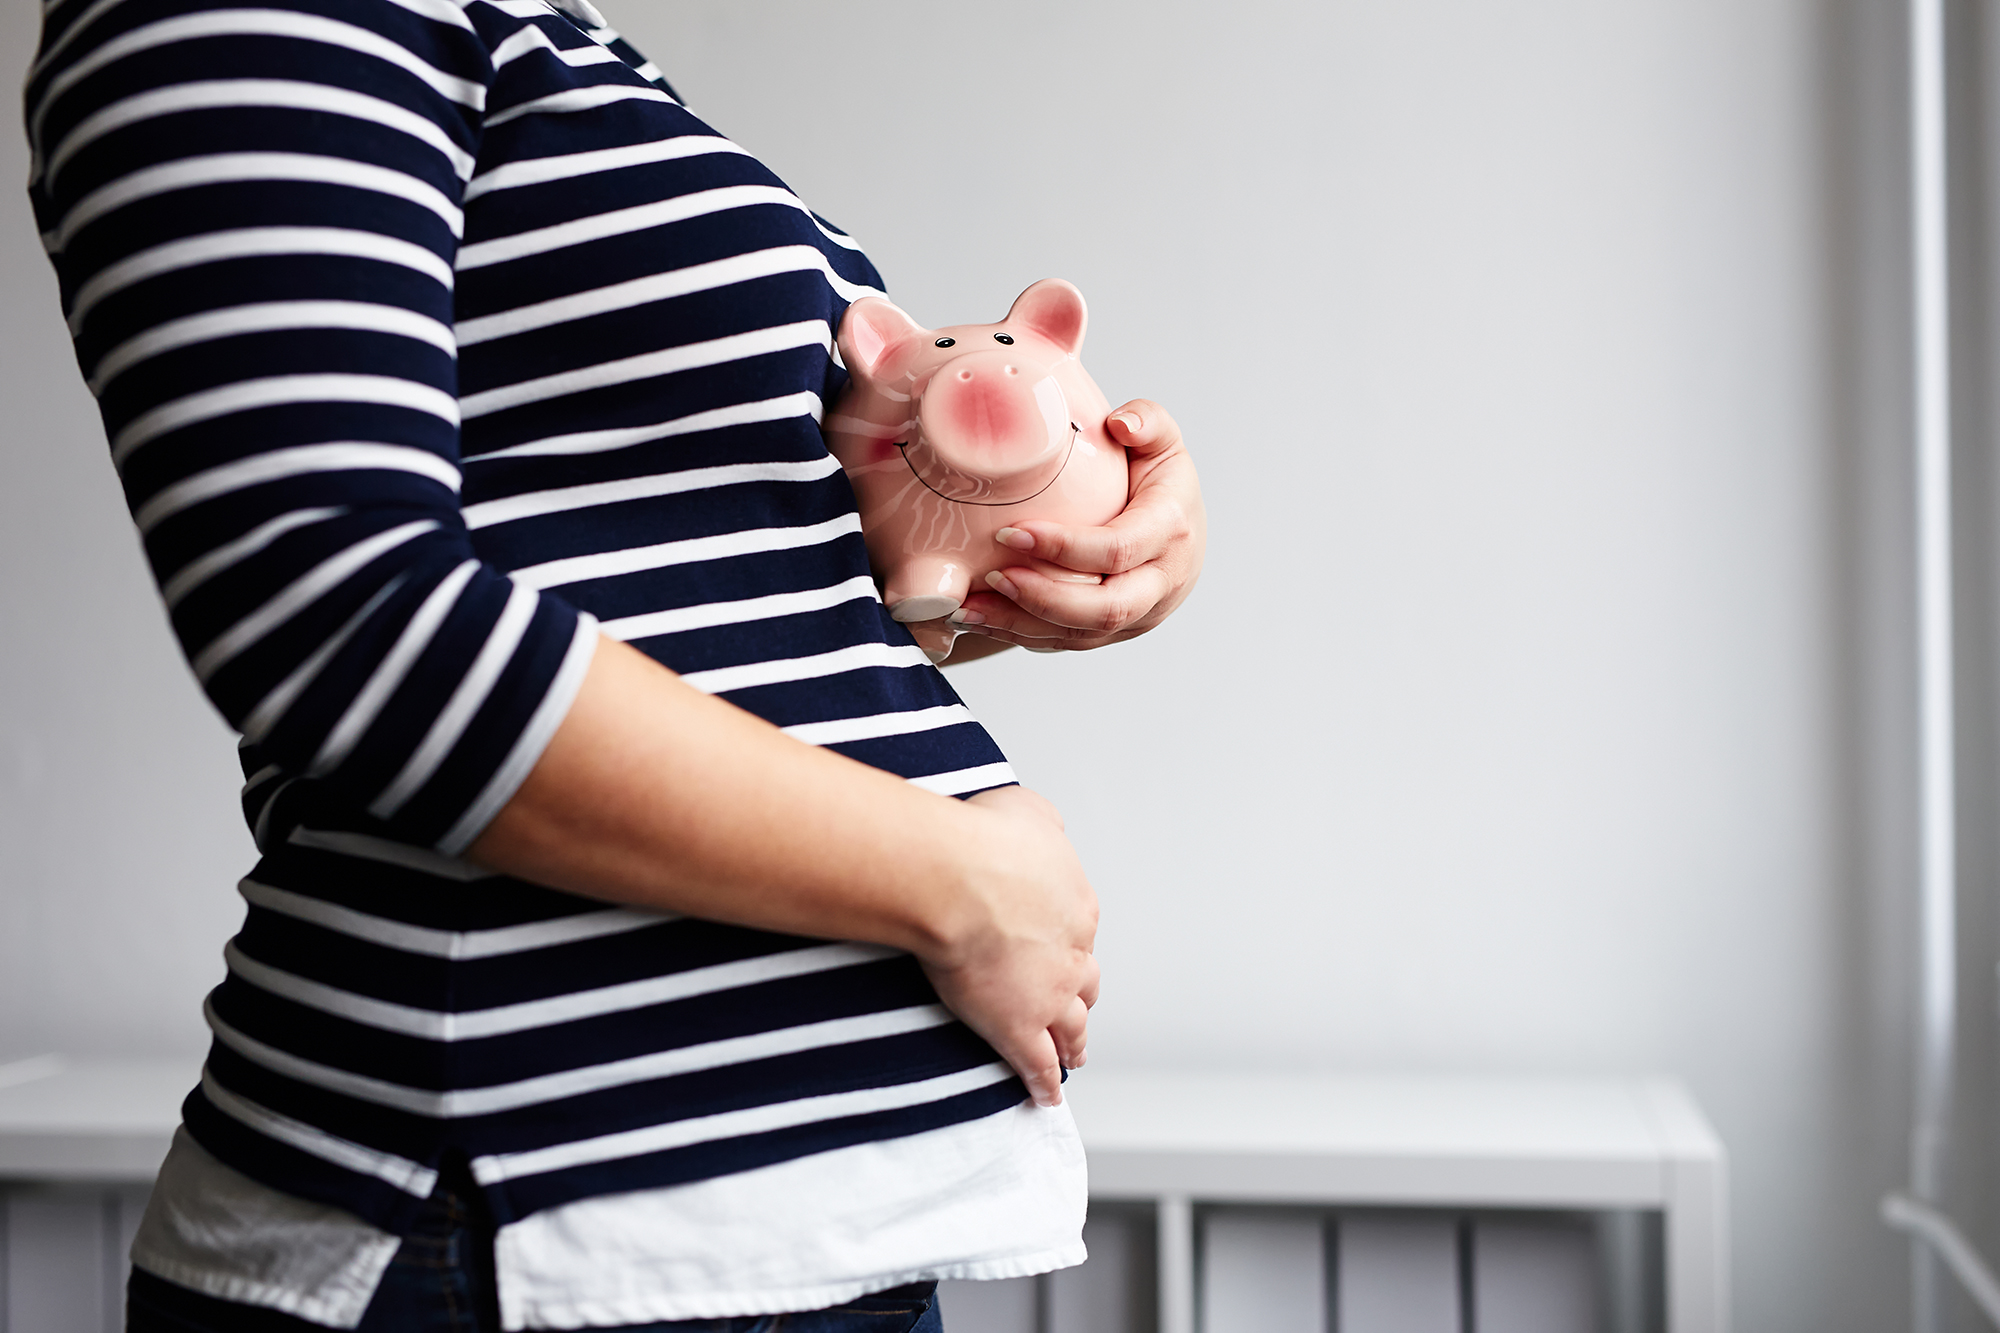 Pregnant woman with piggy bank. (Image: Shutterstock)